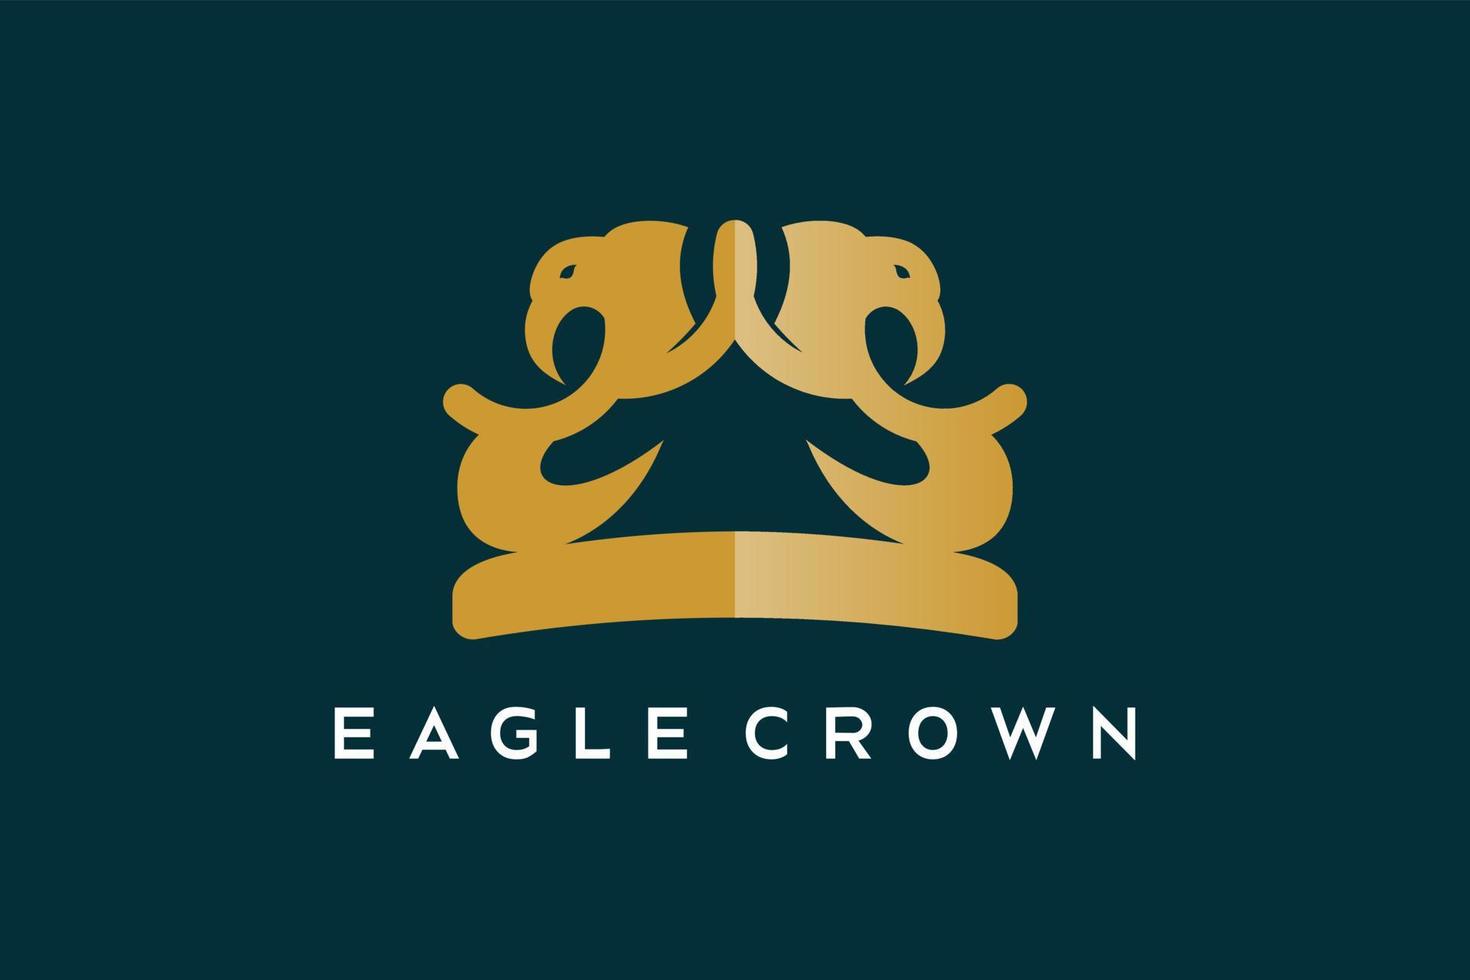 Abstract luxury gold crown logo symbol design combined with eagle head in creative concept vector